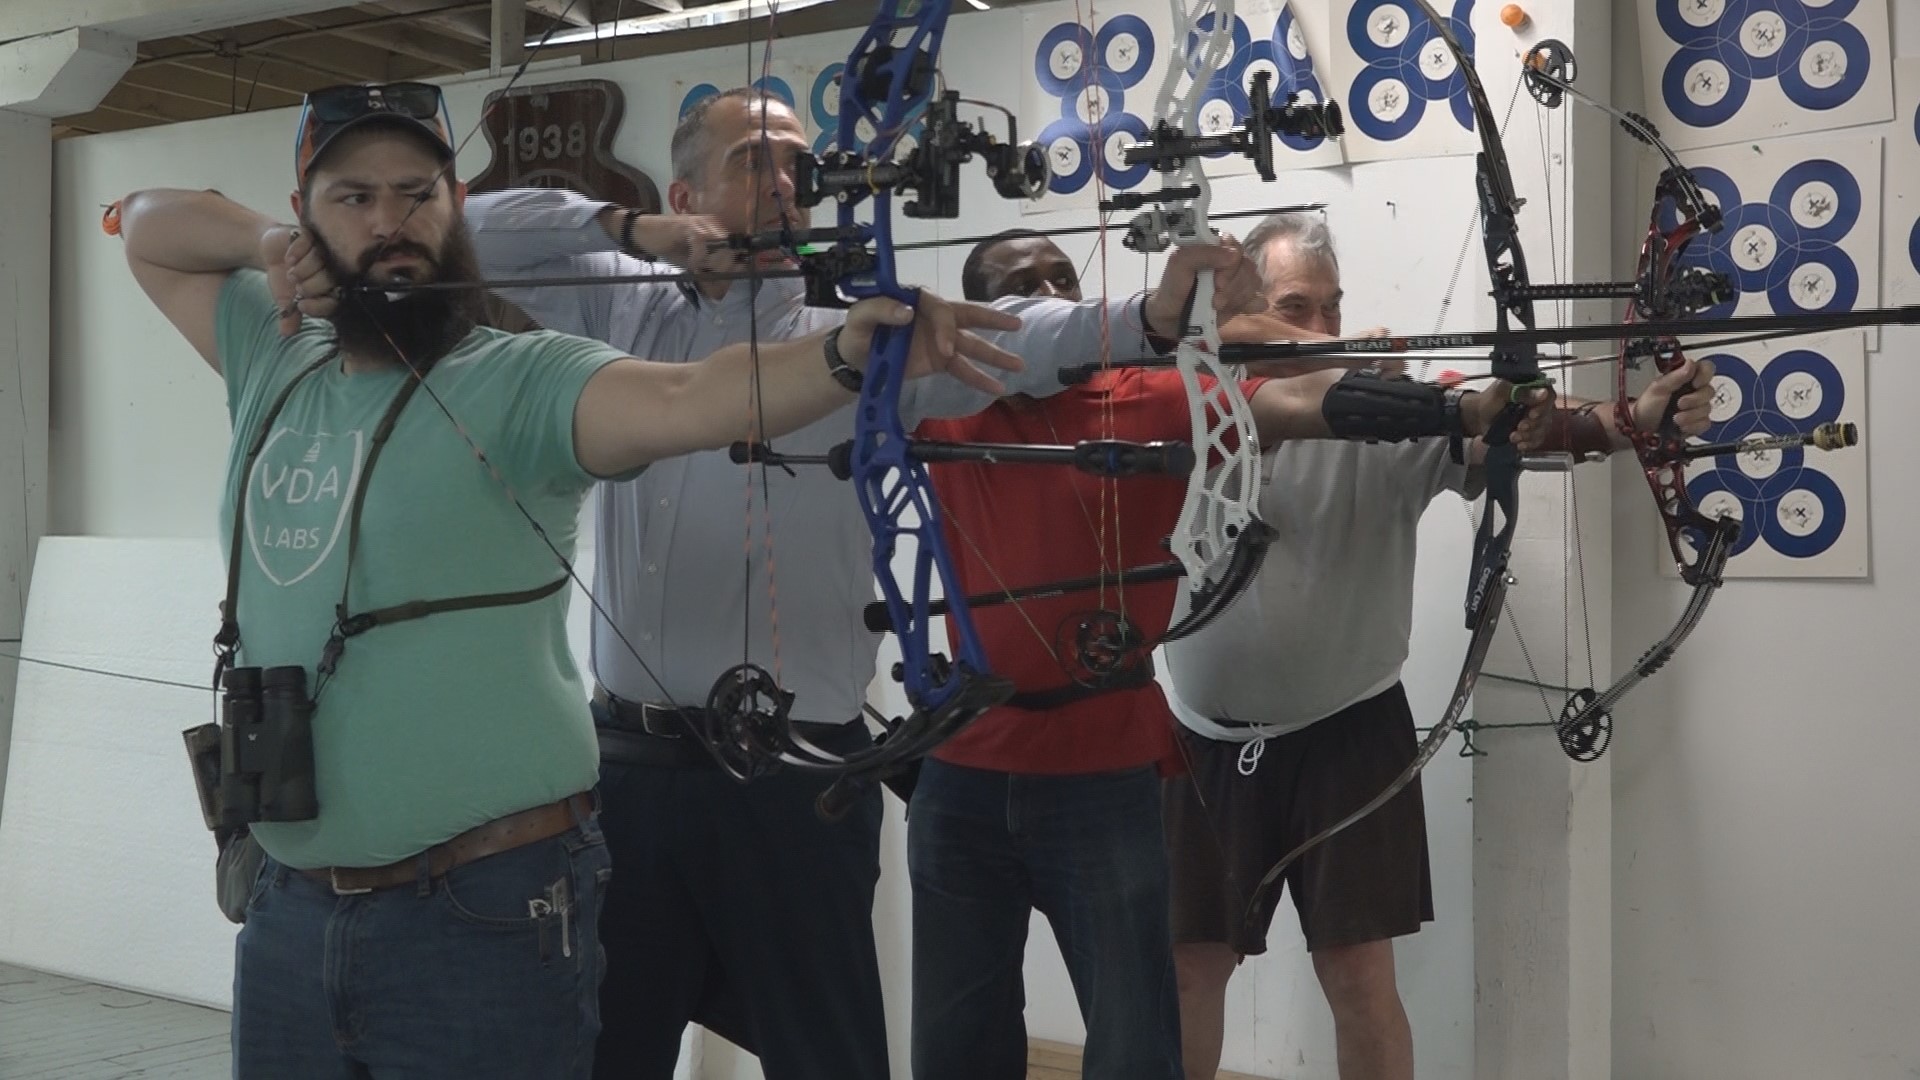 A decades-old archery club in Grand Rapids is looking for a new home, and leaders are asking for help to find a place.